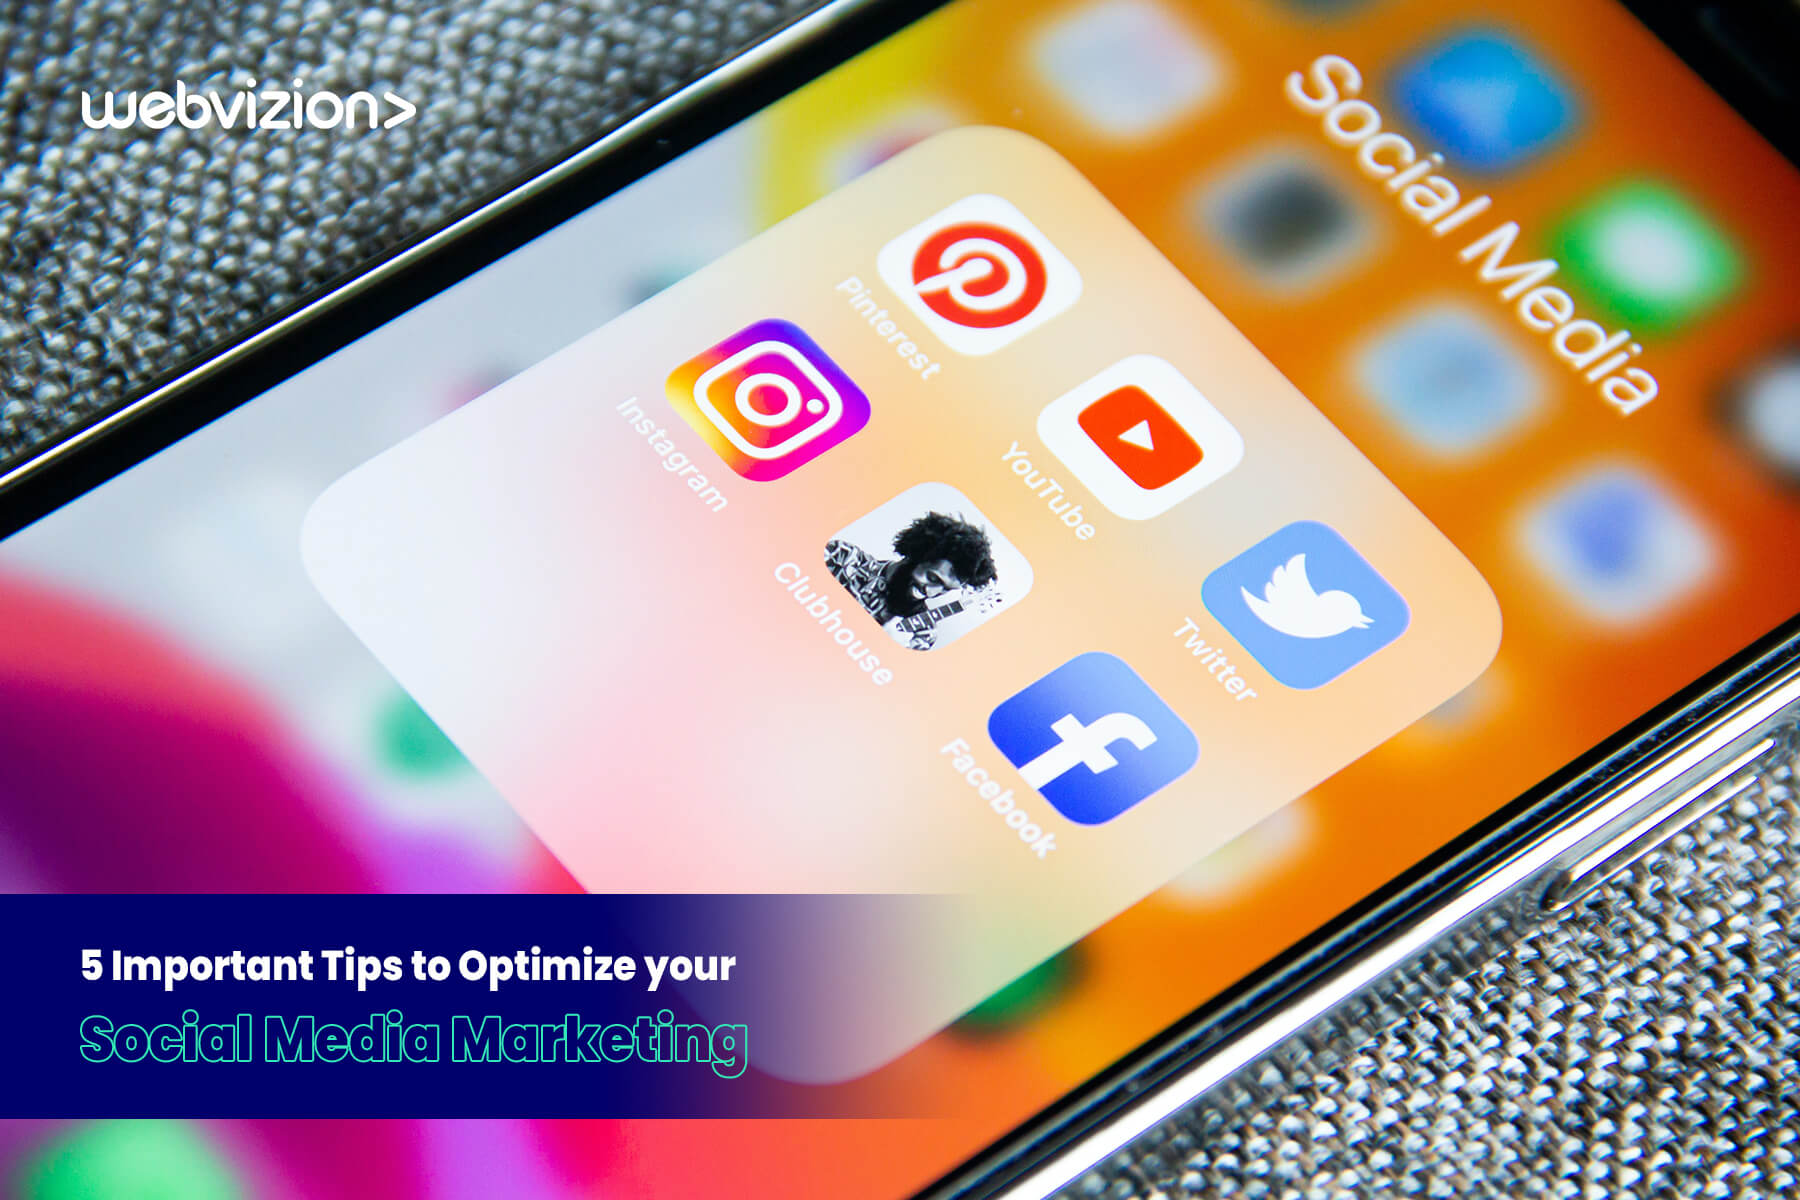 5 Important Tips to Optimize your Social Media Marketing